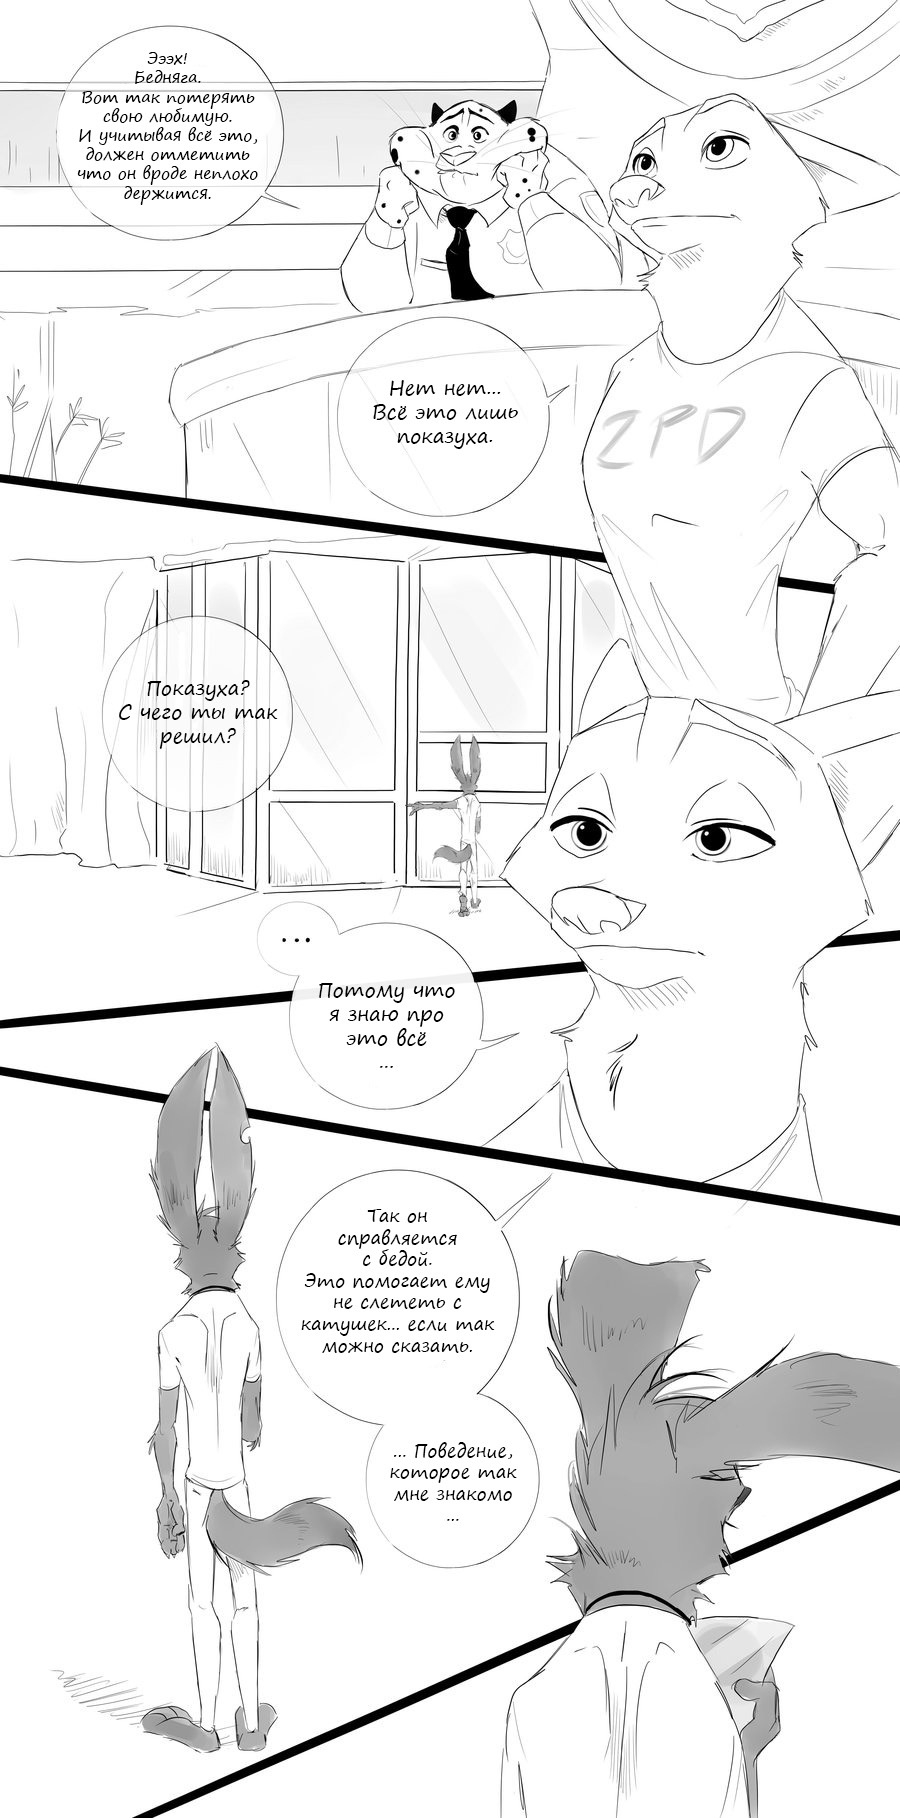 Complicated relationships - part thirteen (second half). - Zootopia, Zootopia, Nick wilde, , Claw, Comics, Longpost, Spintherella